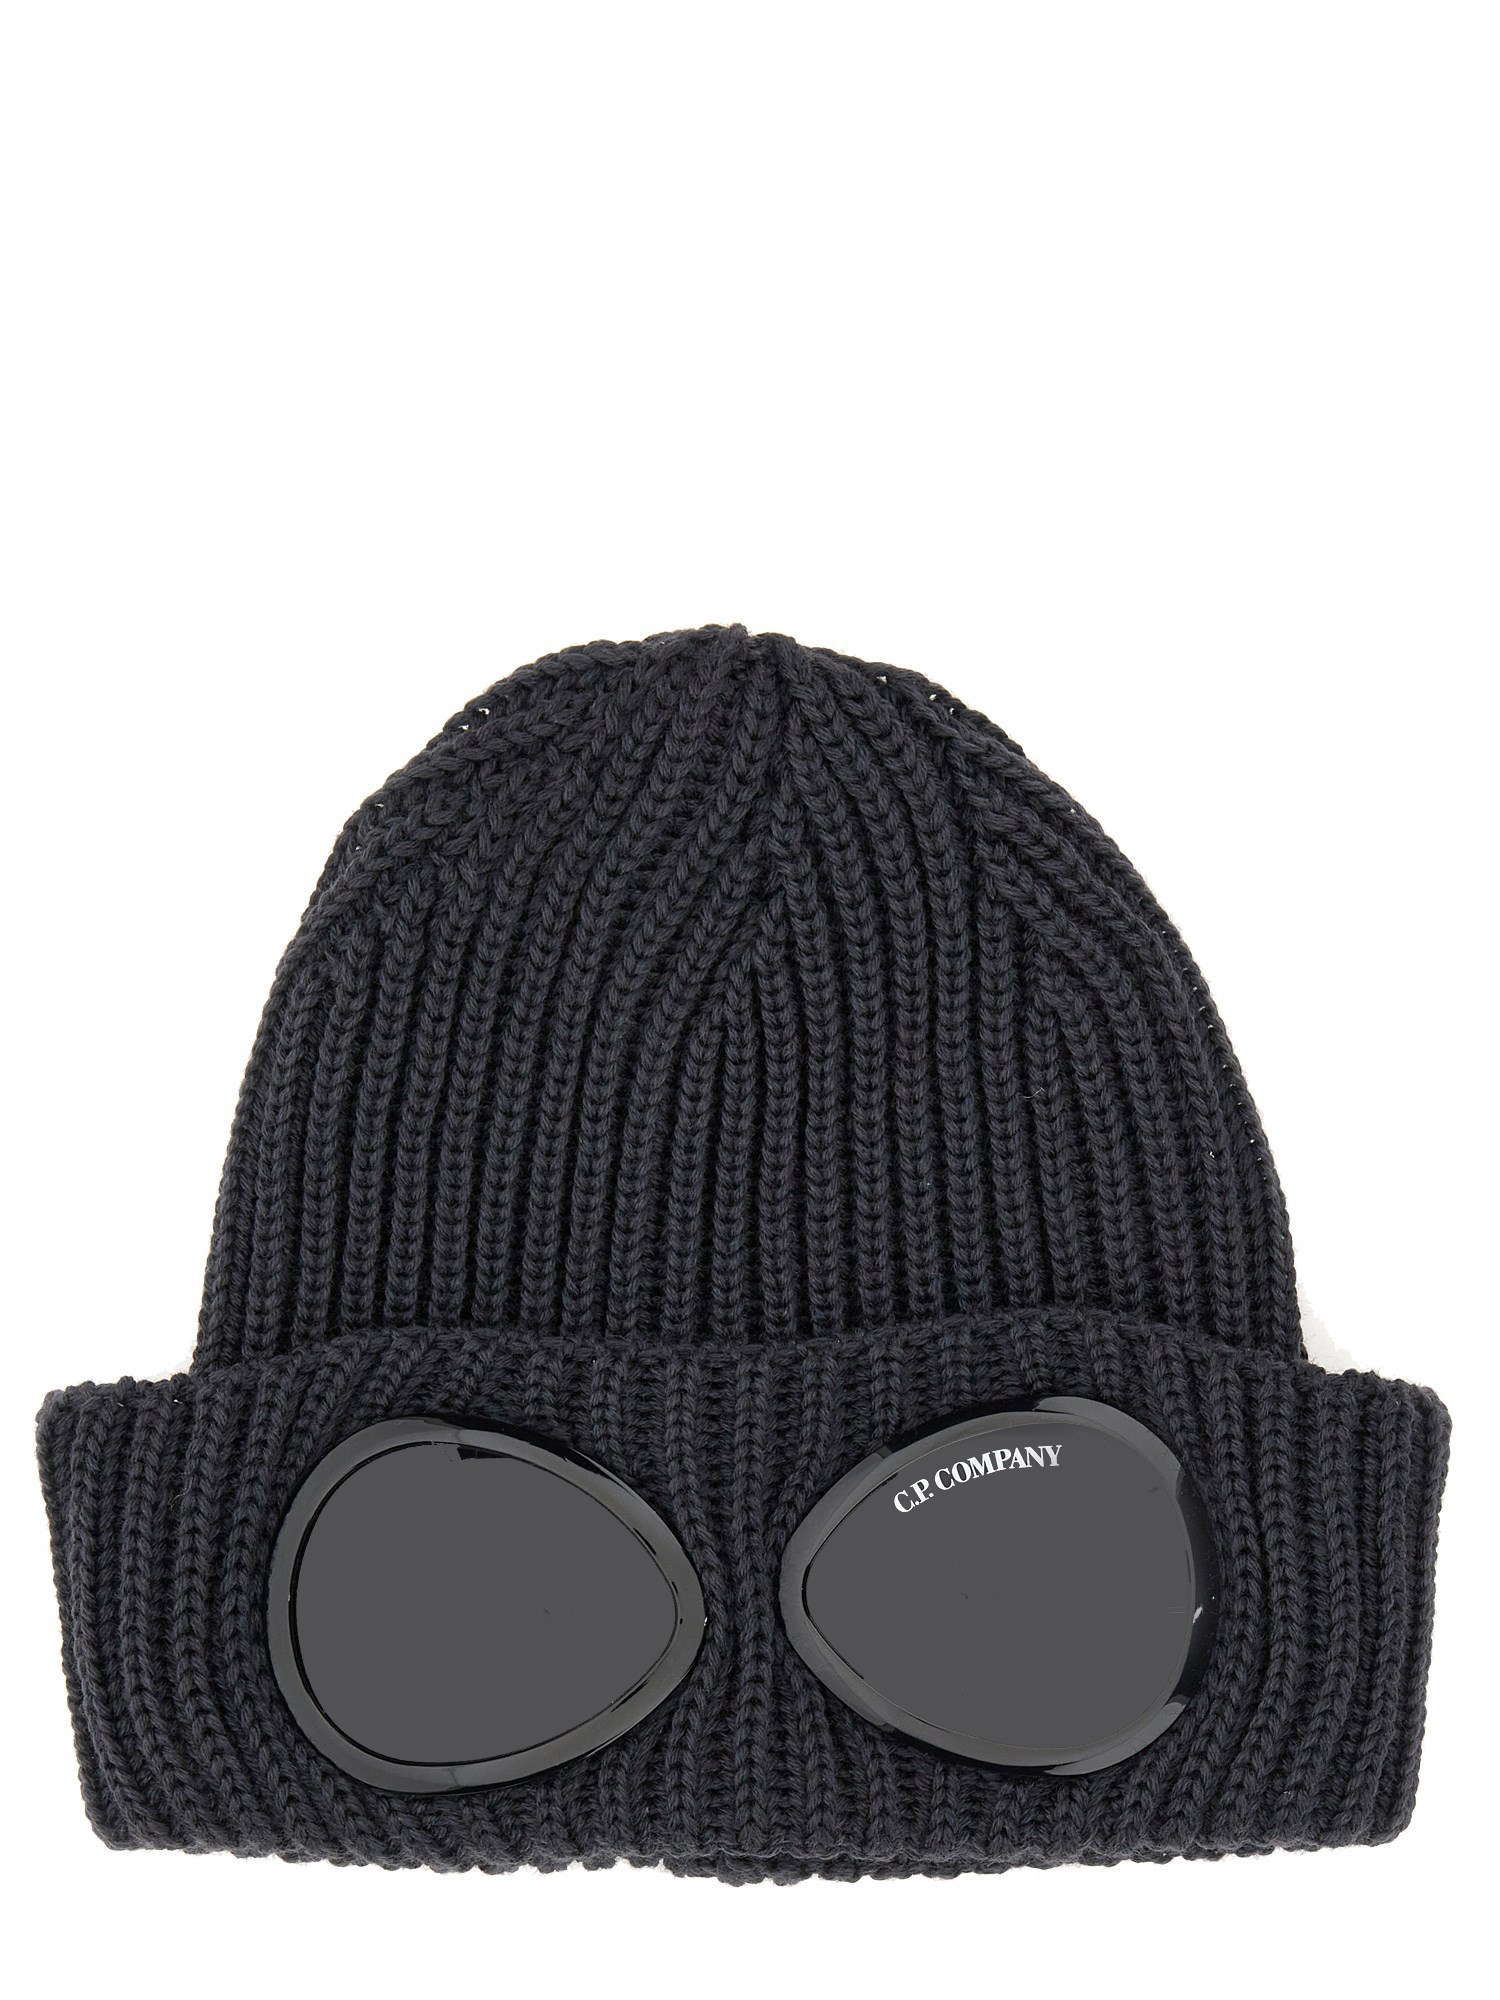 C.P. COMPANY KNIT HAT WITH GOGGLE